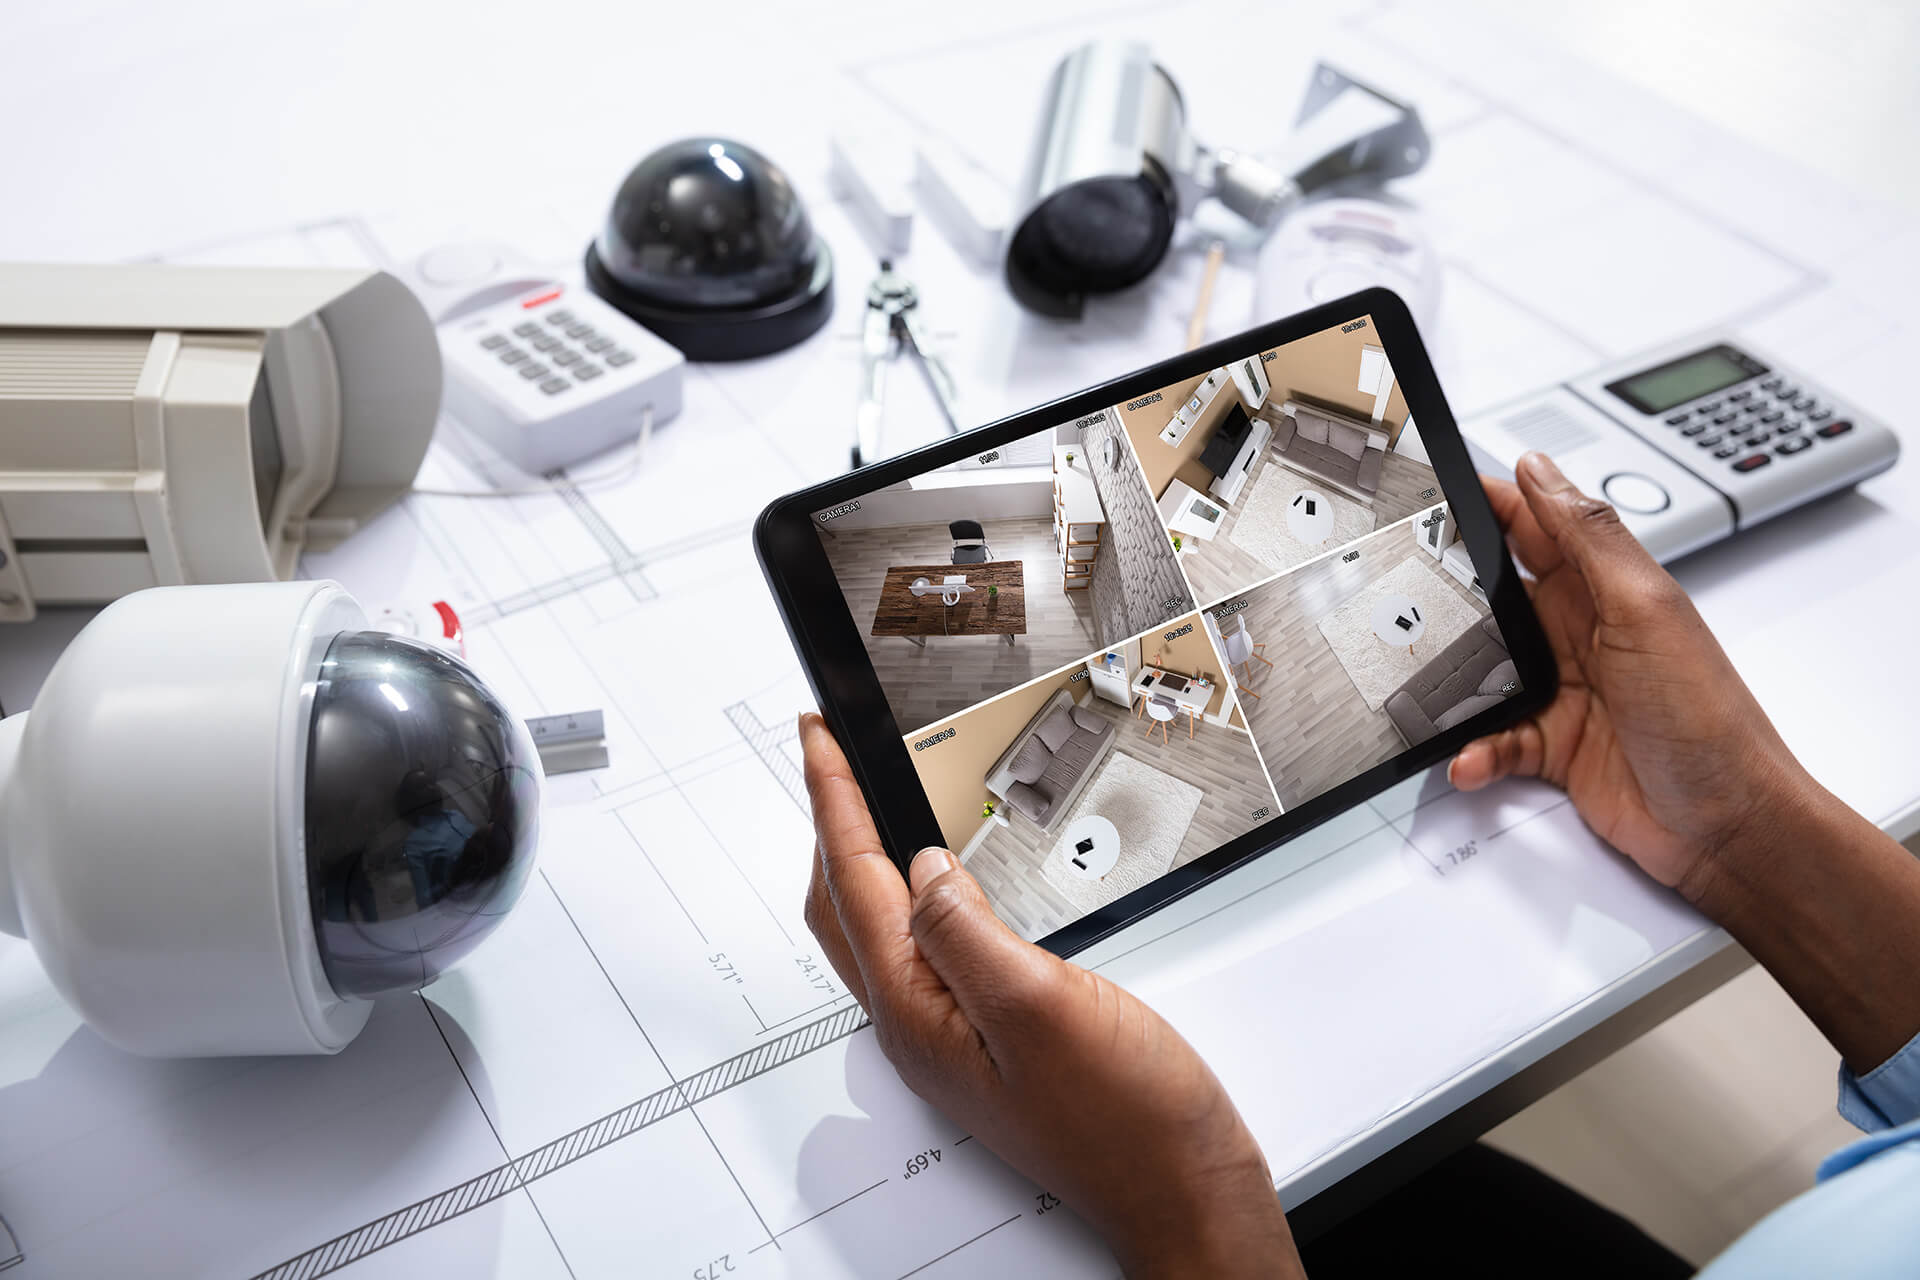 CCTV vs IP Cameras: Which is Best Suited for your Business?